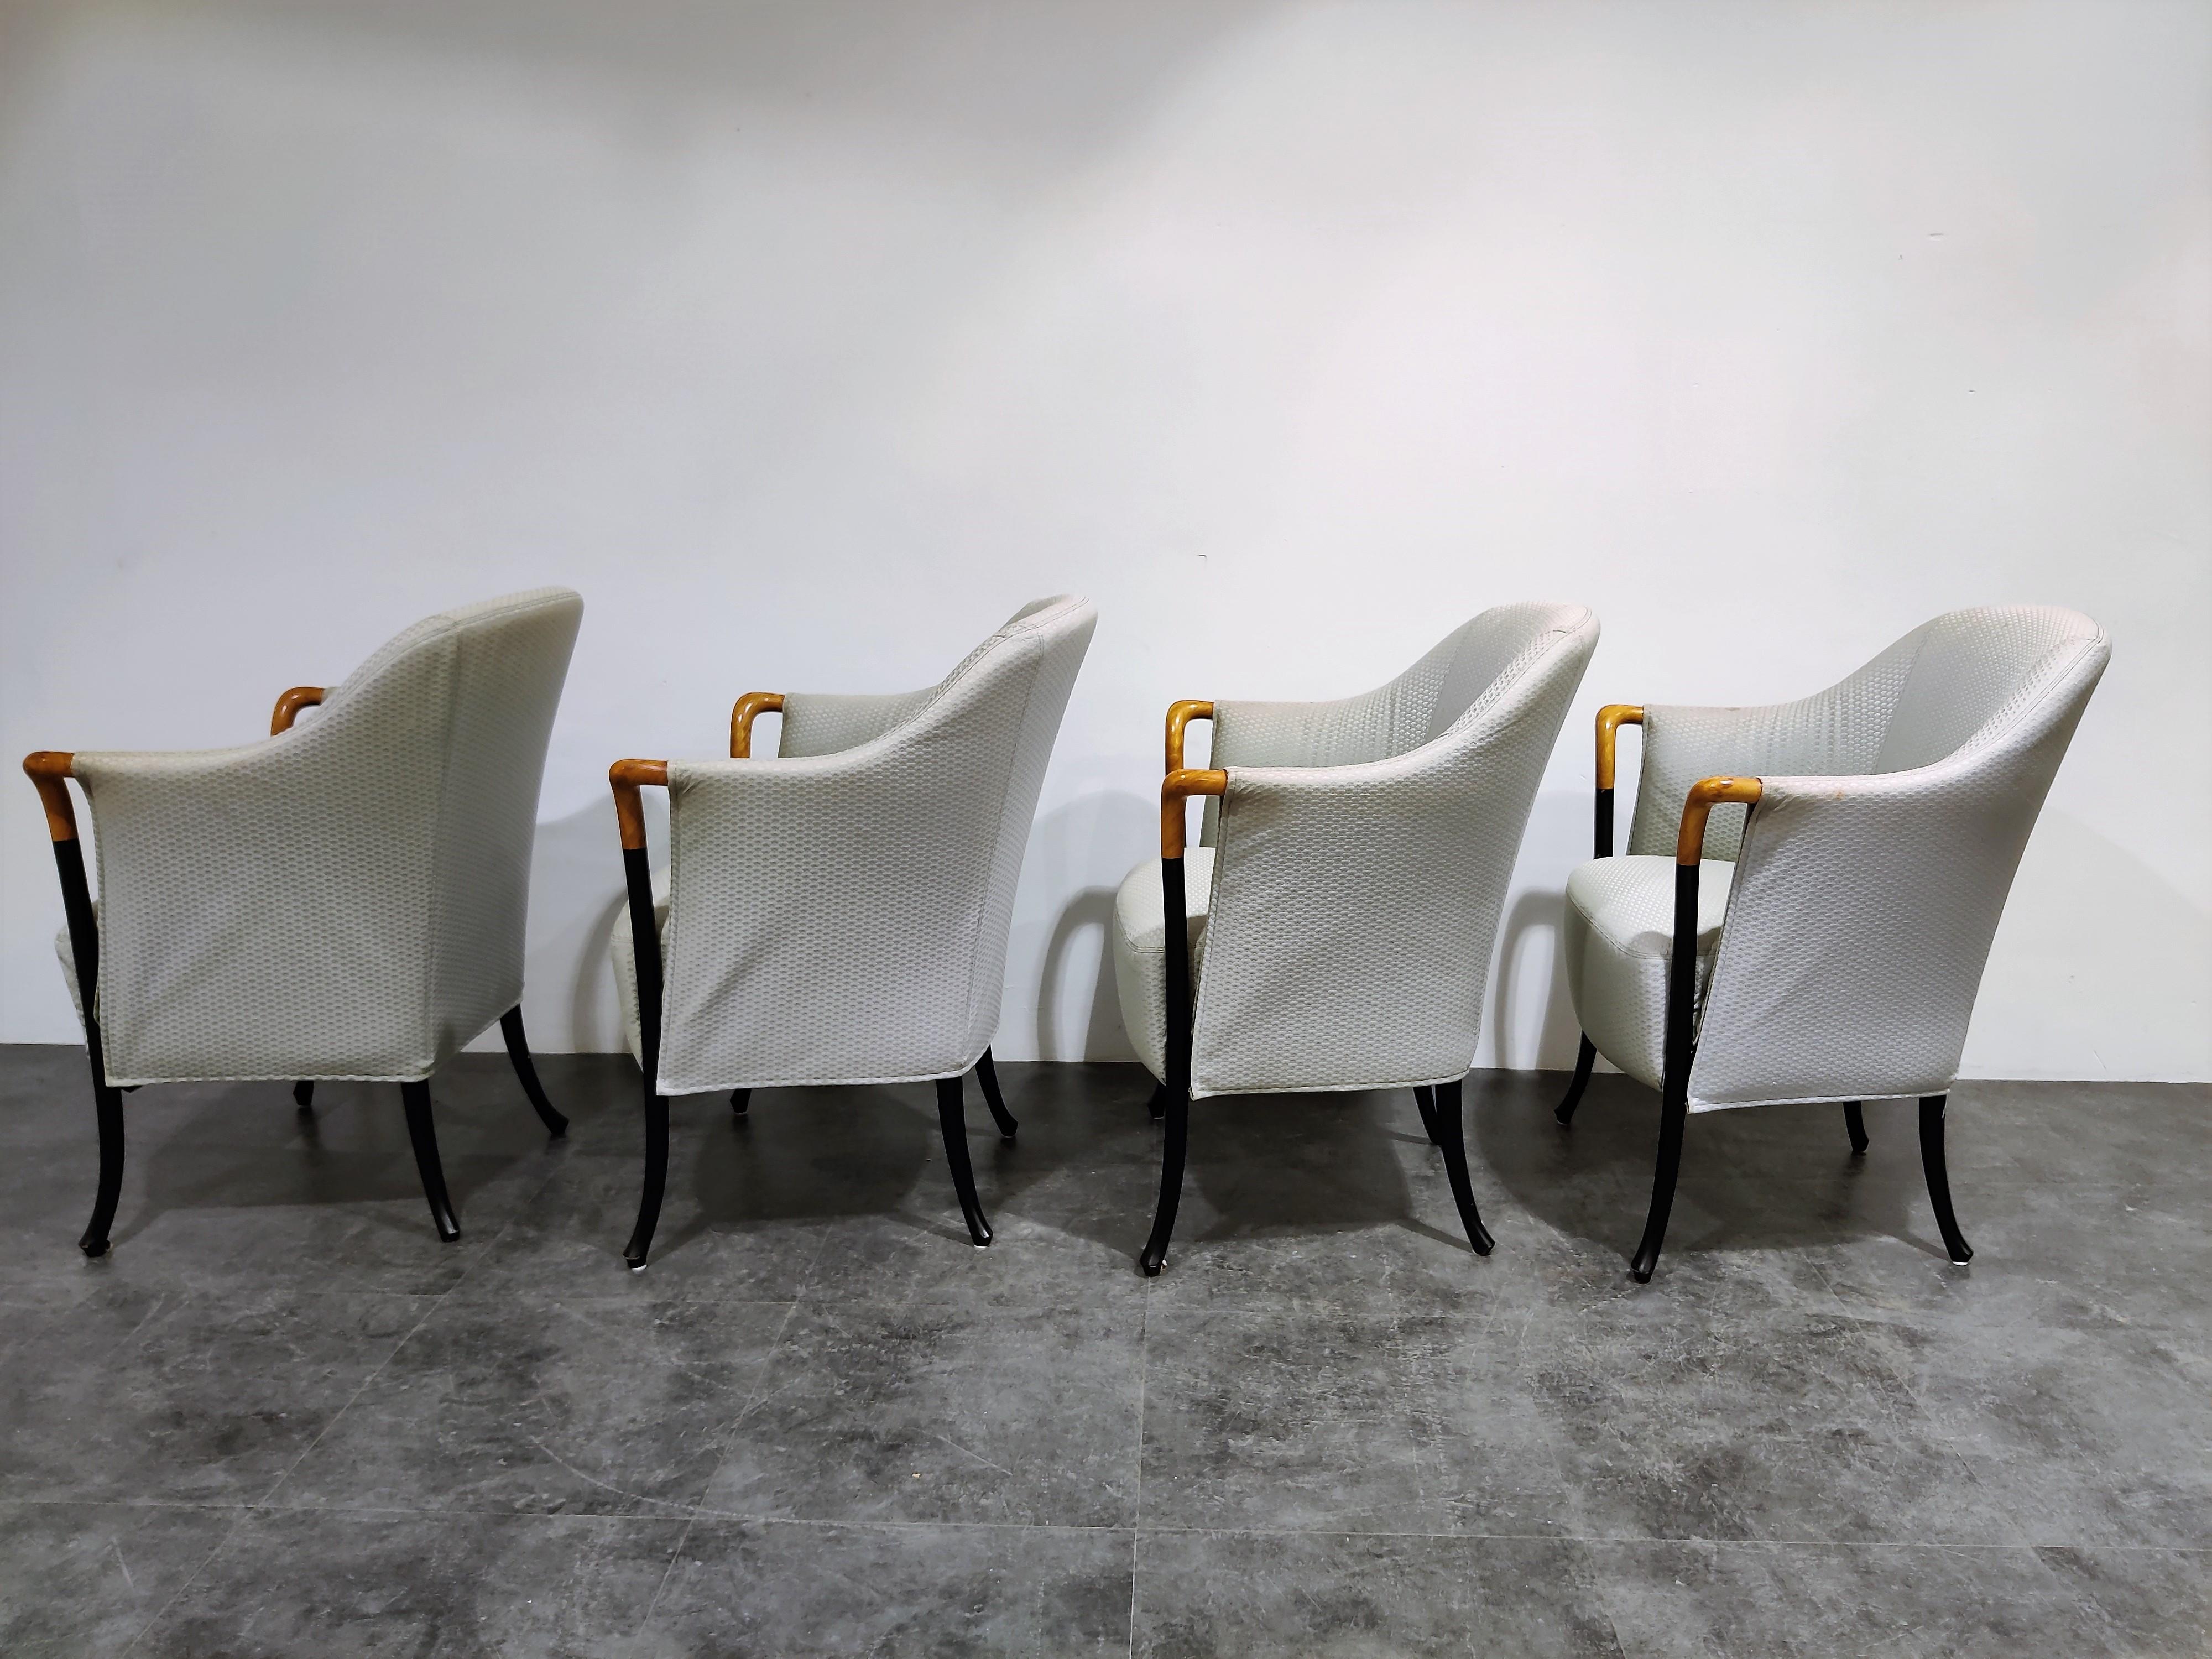 Up for sale is this beautiful designed set of 4 armchairs/dining chairs by Umberto Asnago for Giorgetti.

Elegant italian design with the beautiful integrated wooden armrest and the black lacquered frame.

The chairs have a light grey